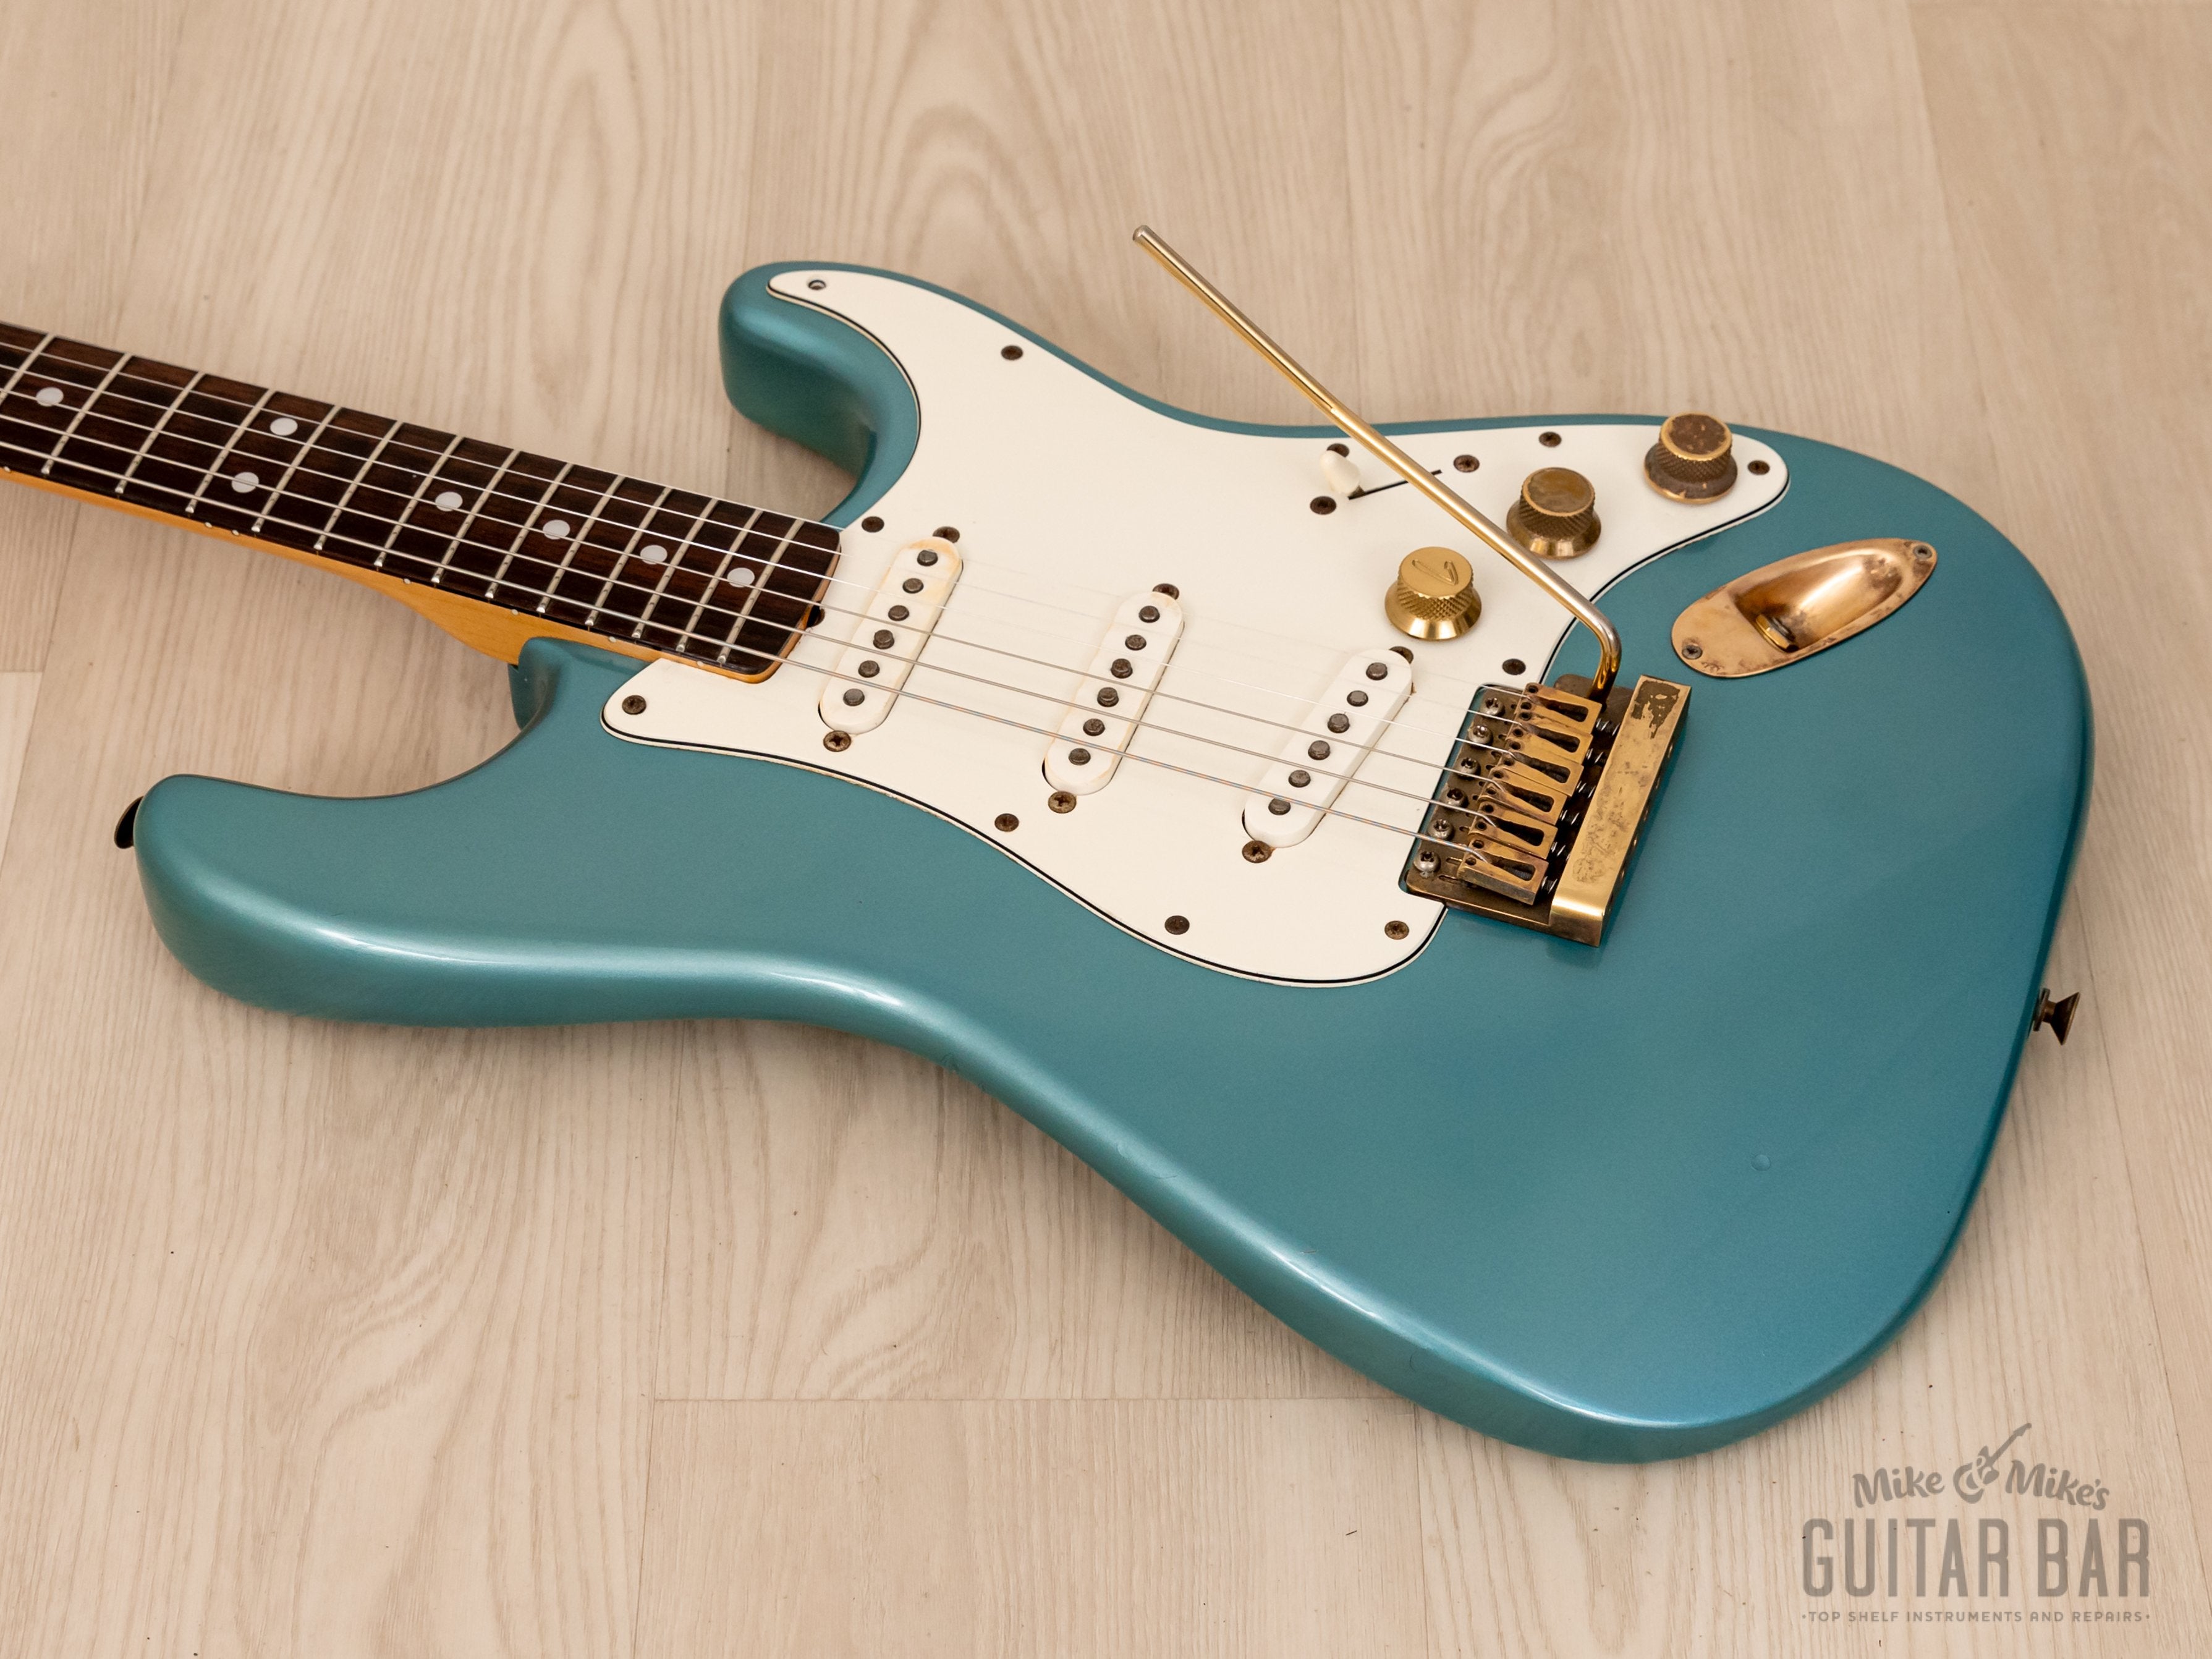 1981 Tokai SS70 Limited Edition Vintage S-Style Superstrat Guitar Light  Blue